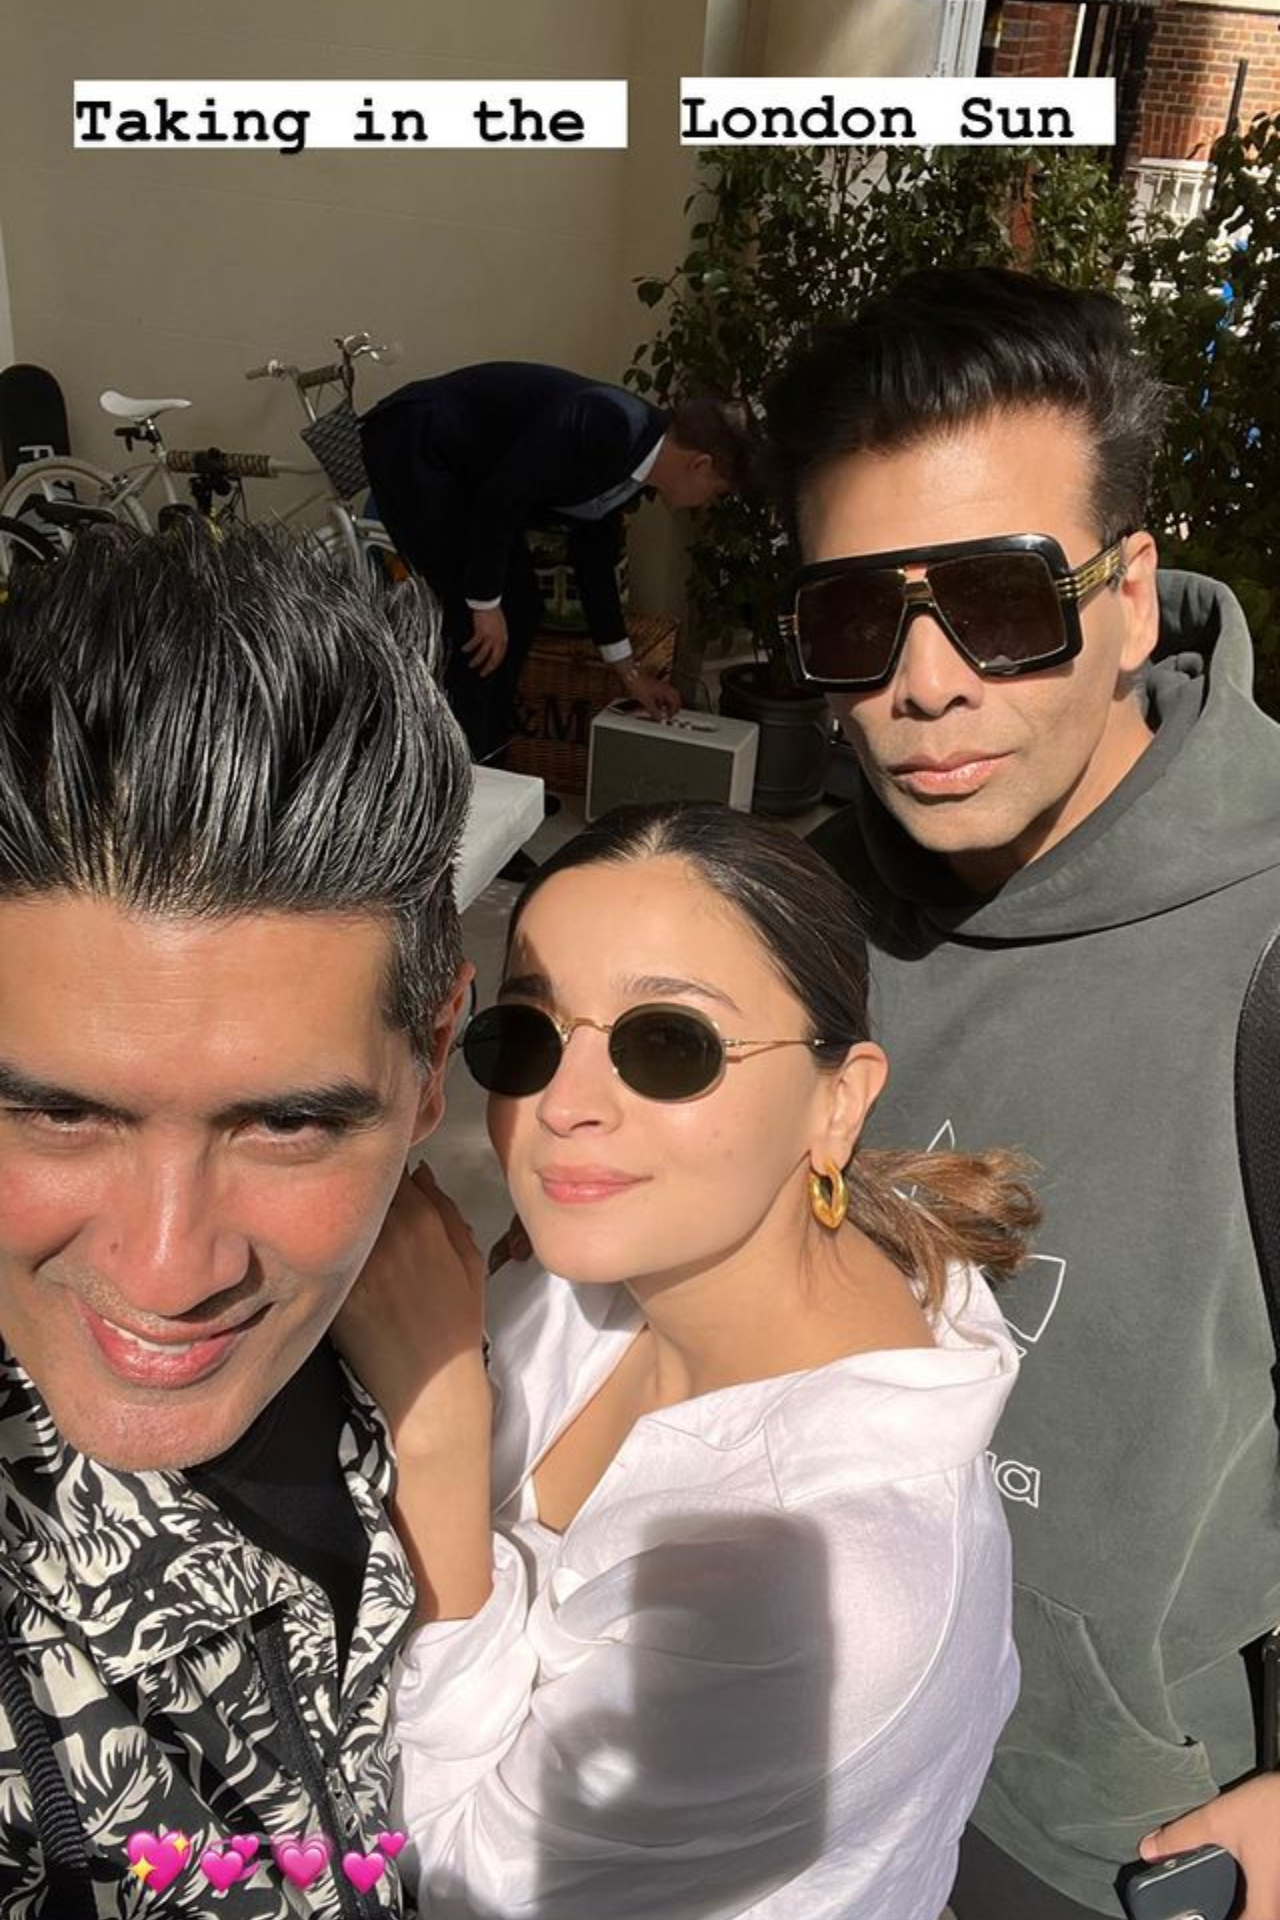 Alia Bhatt looks like a ray of sunshine in a selfie with Manish Malhotra and Karan Johar.&amp;nbsp;This is her first photo after the pregnancy announcement.